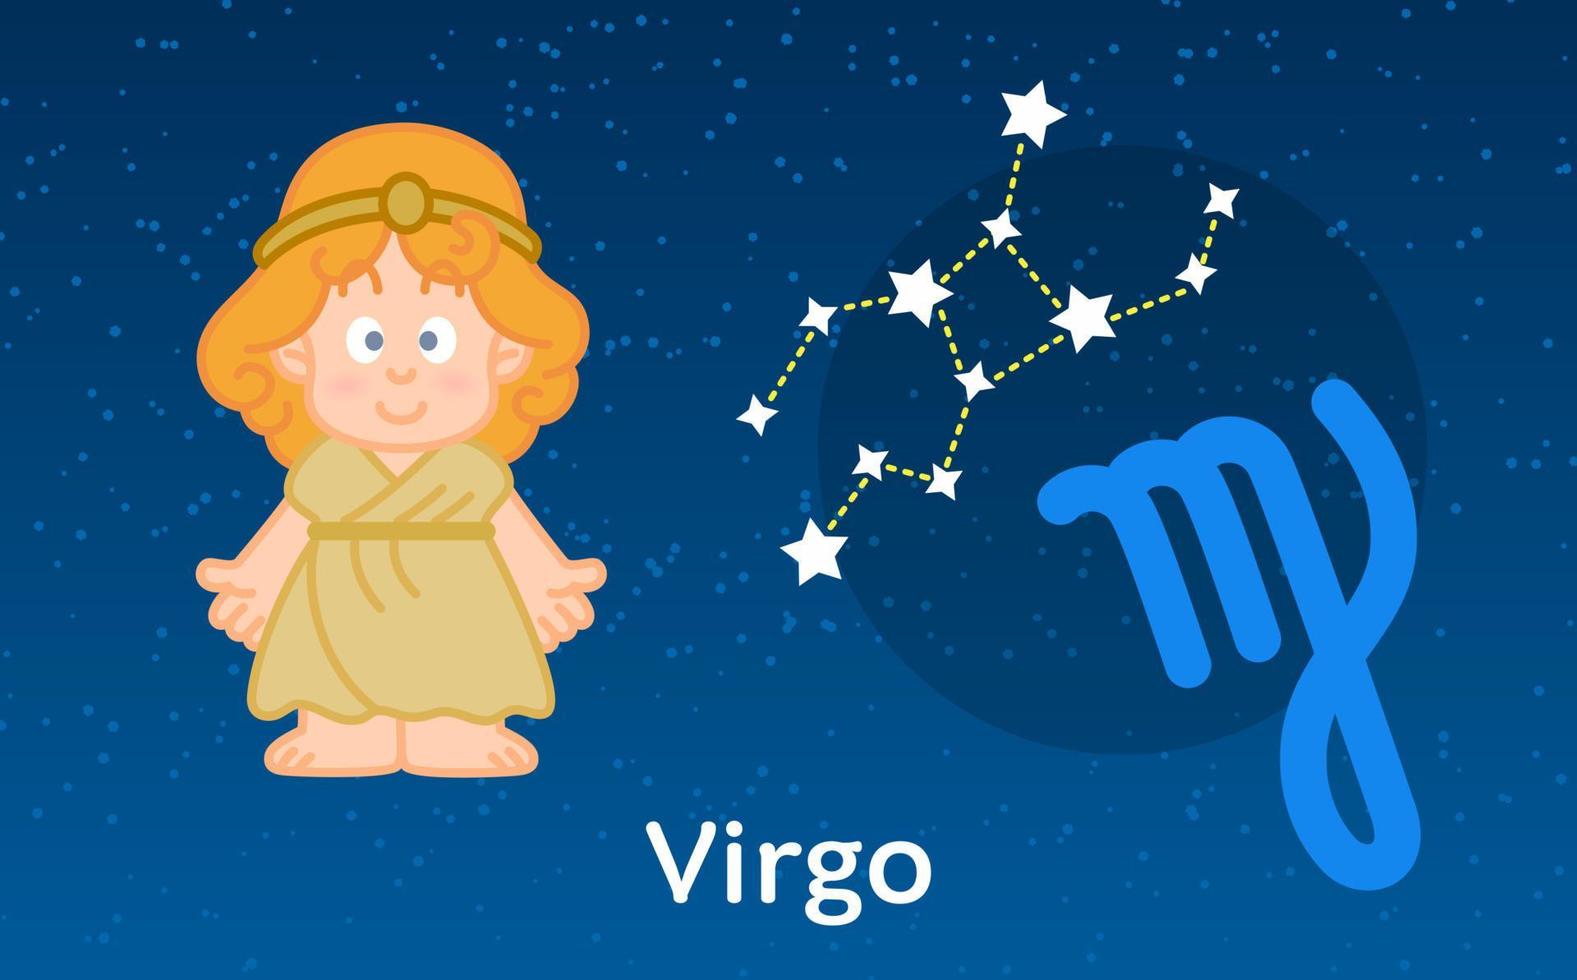 Cute cartoon Astrology of Virgo zodiac with Constellations sign. Vector illustration on the stars sky background